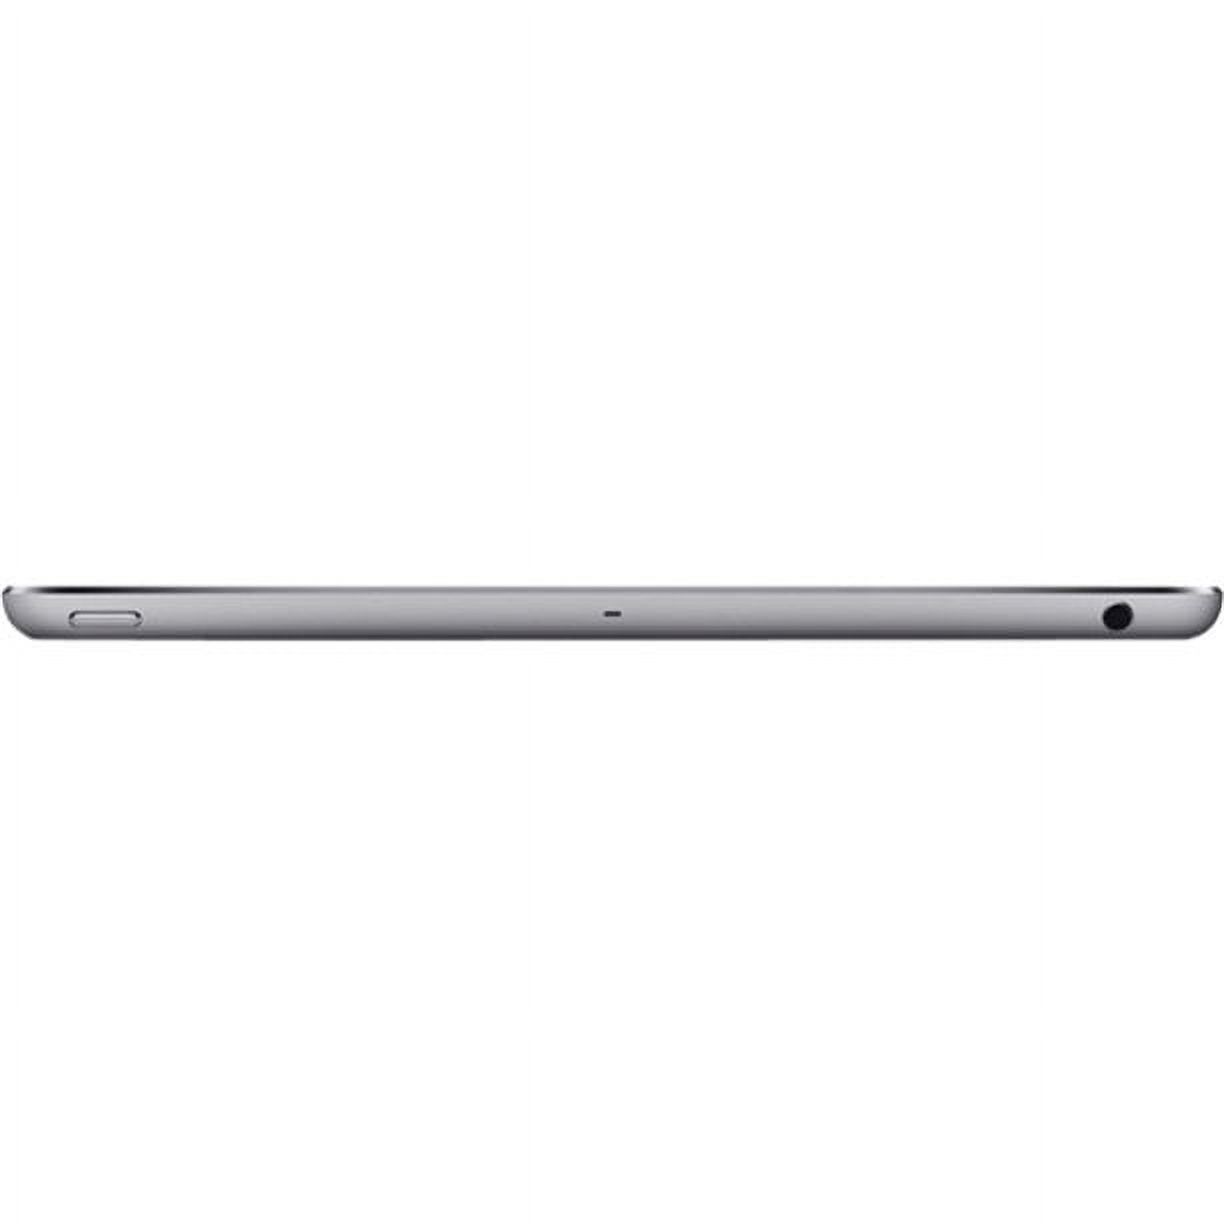 Apple iPad Air ME993LL/A Tablet, 9.7" QXGA, Apple A7, 16 GB Storage, iOS 7, Space Gray - image 4 of 5